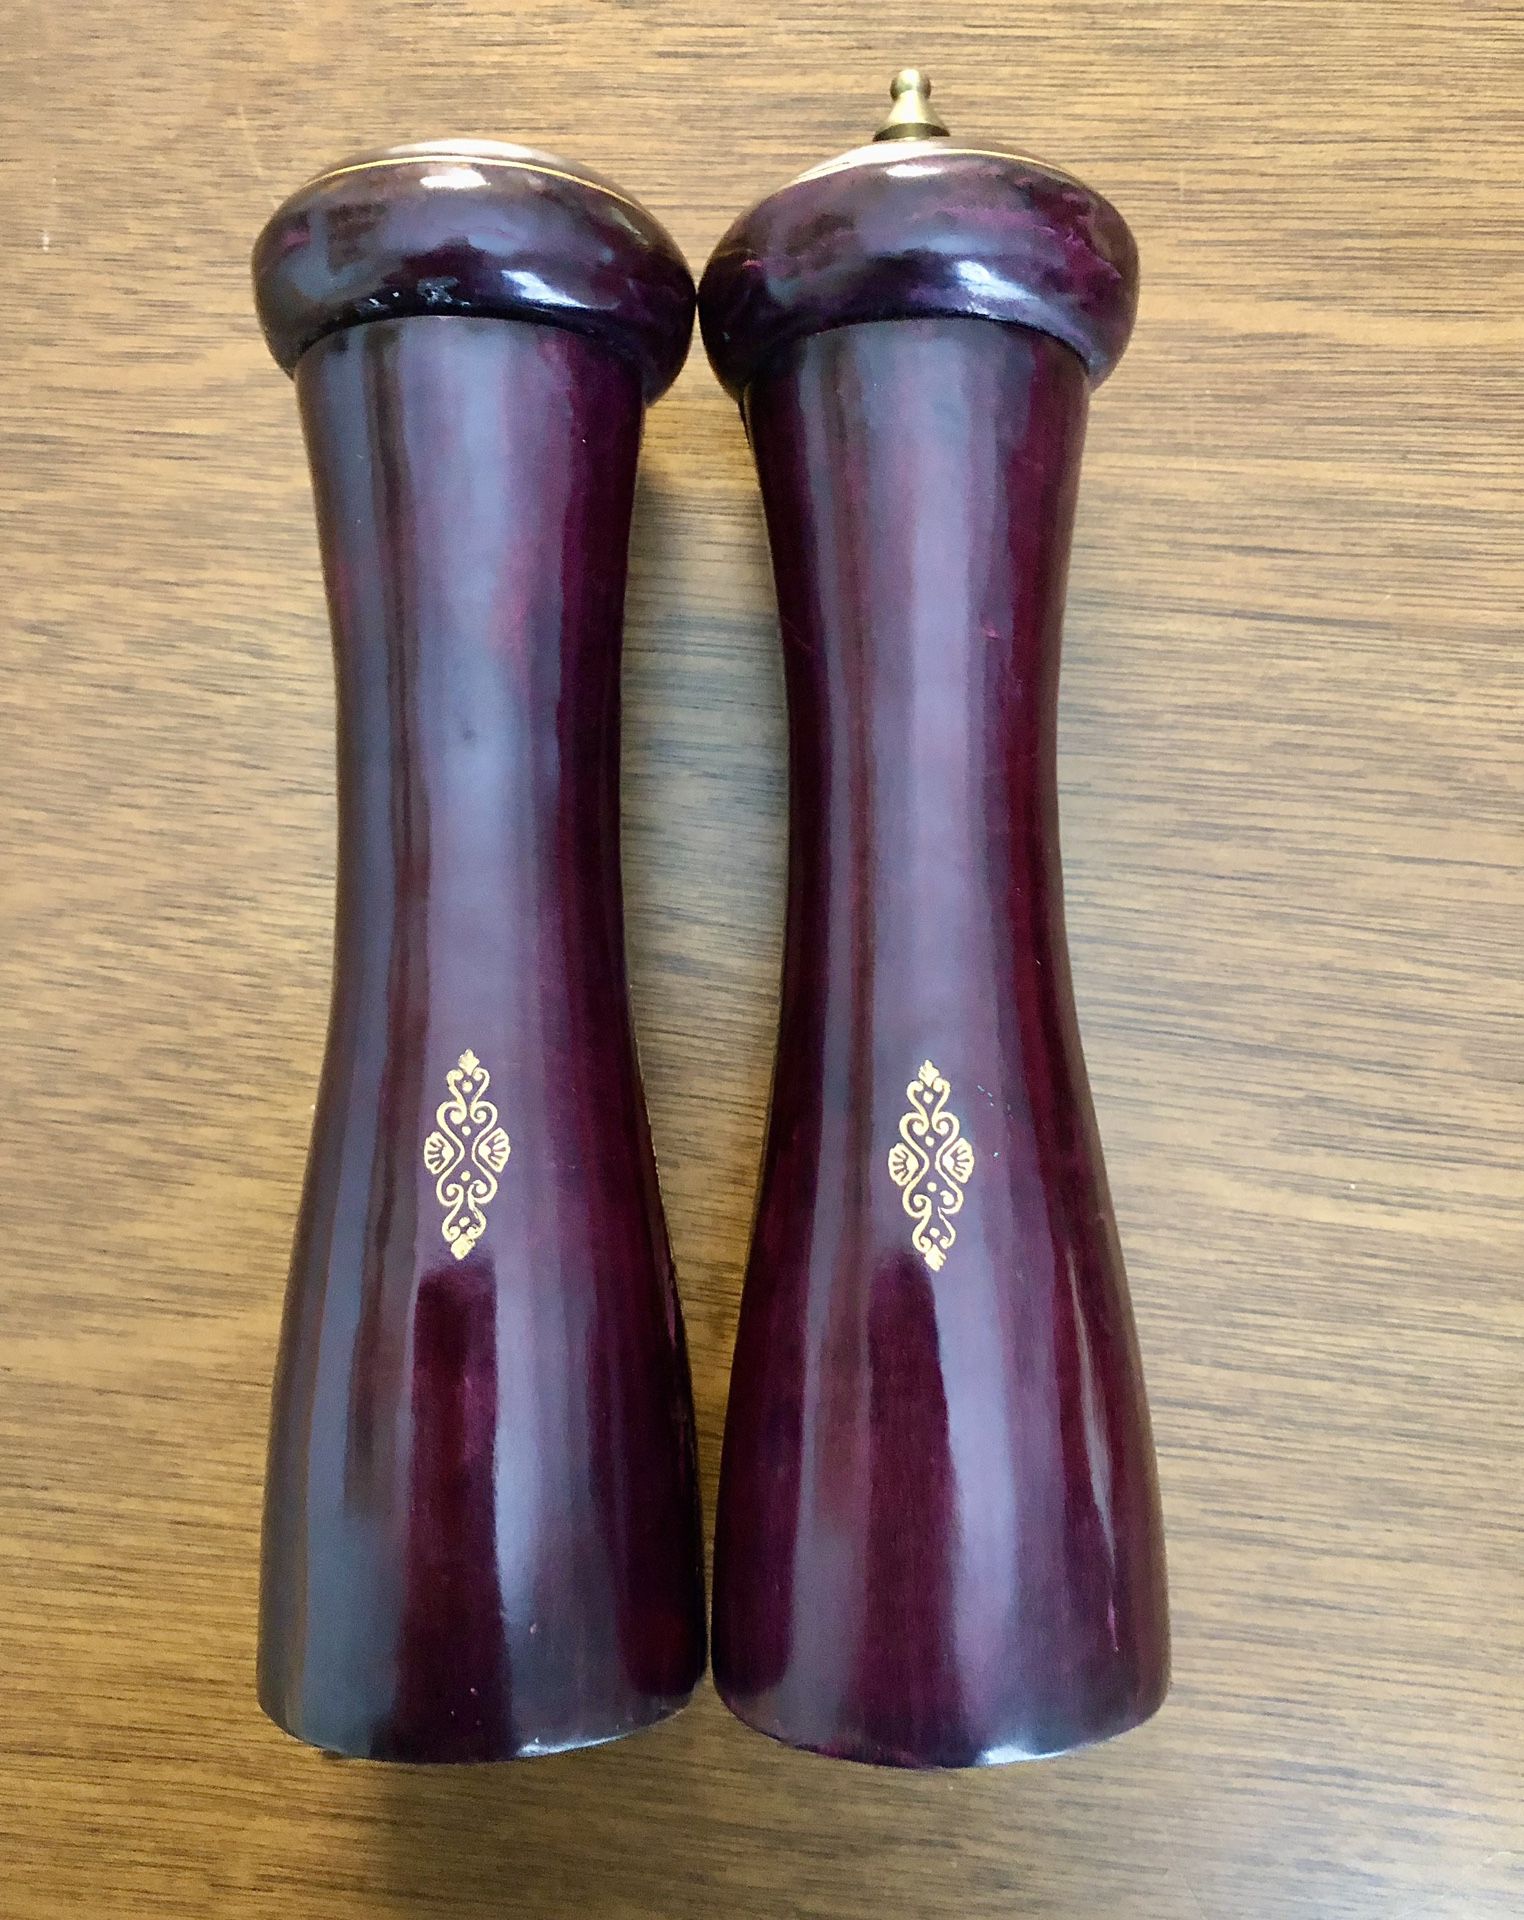 Italian Leather Wrapped Salt & Pepper Mill Set trimmed in gold leaf 